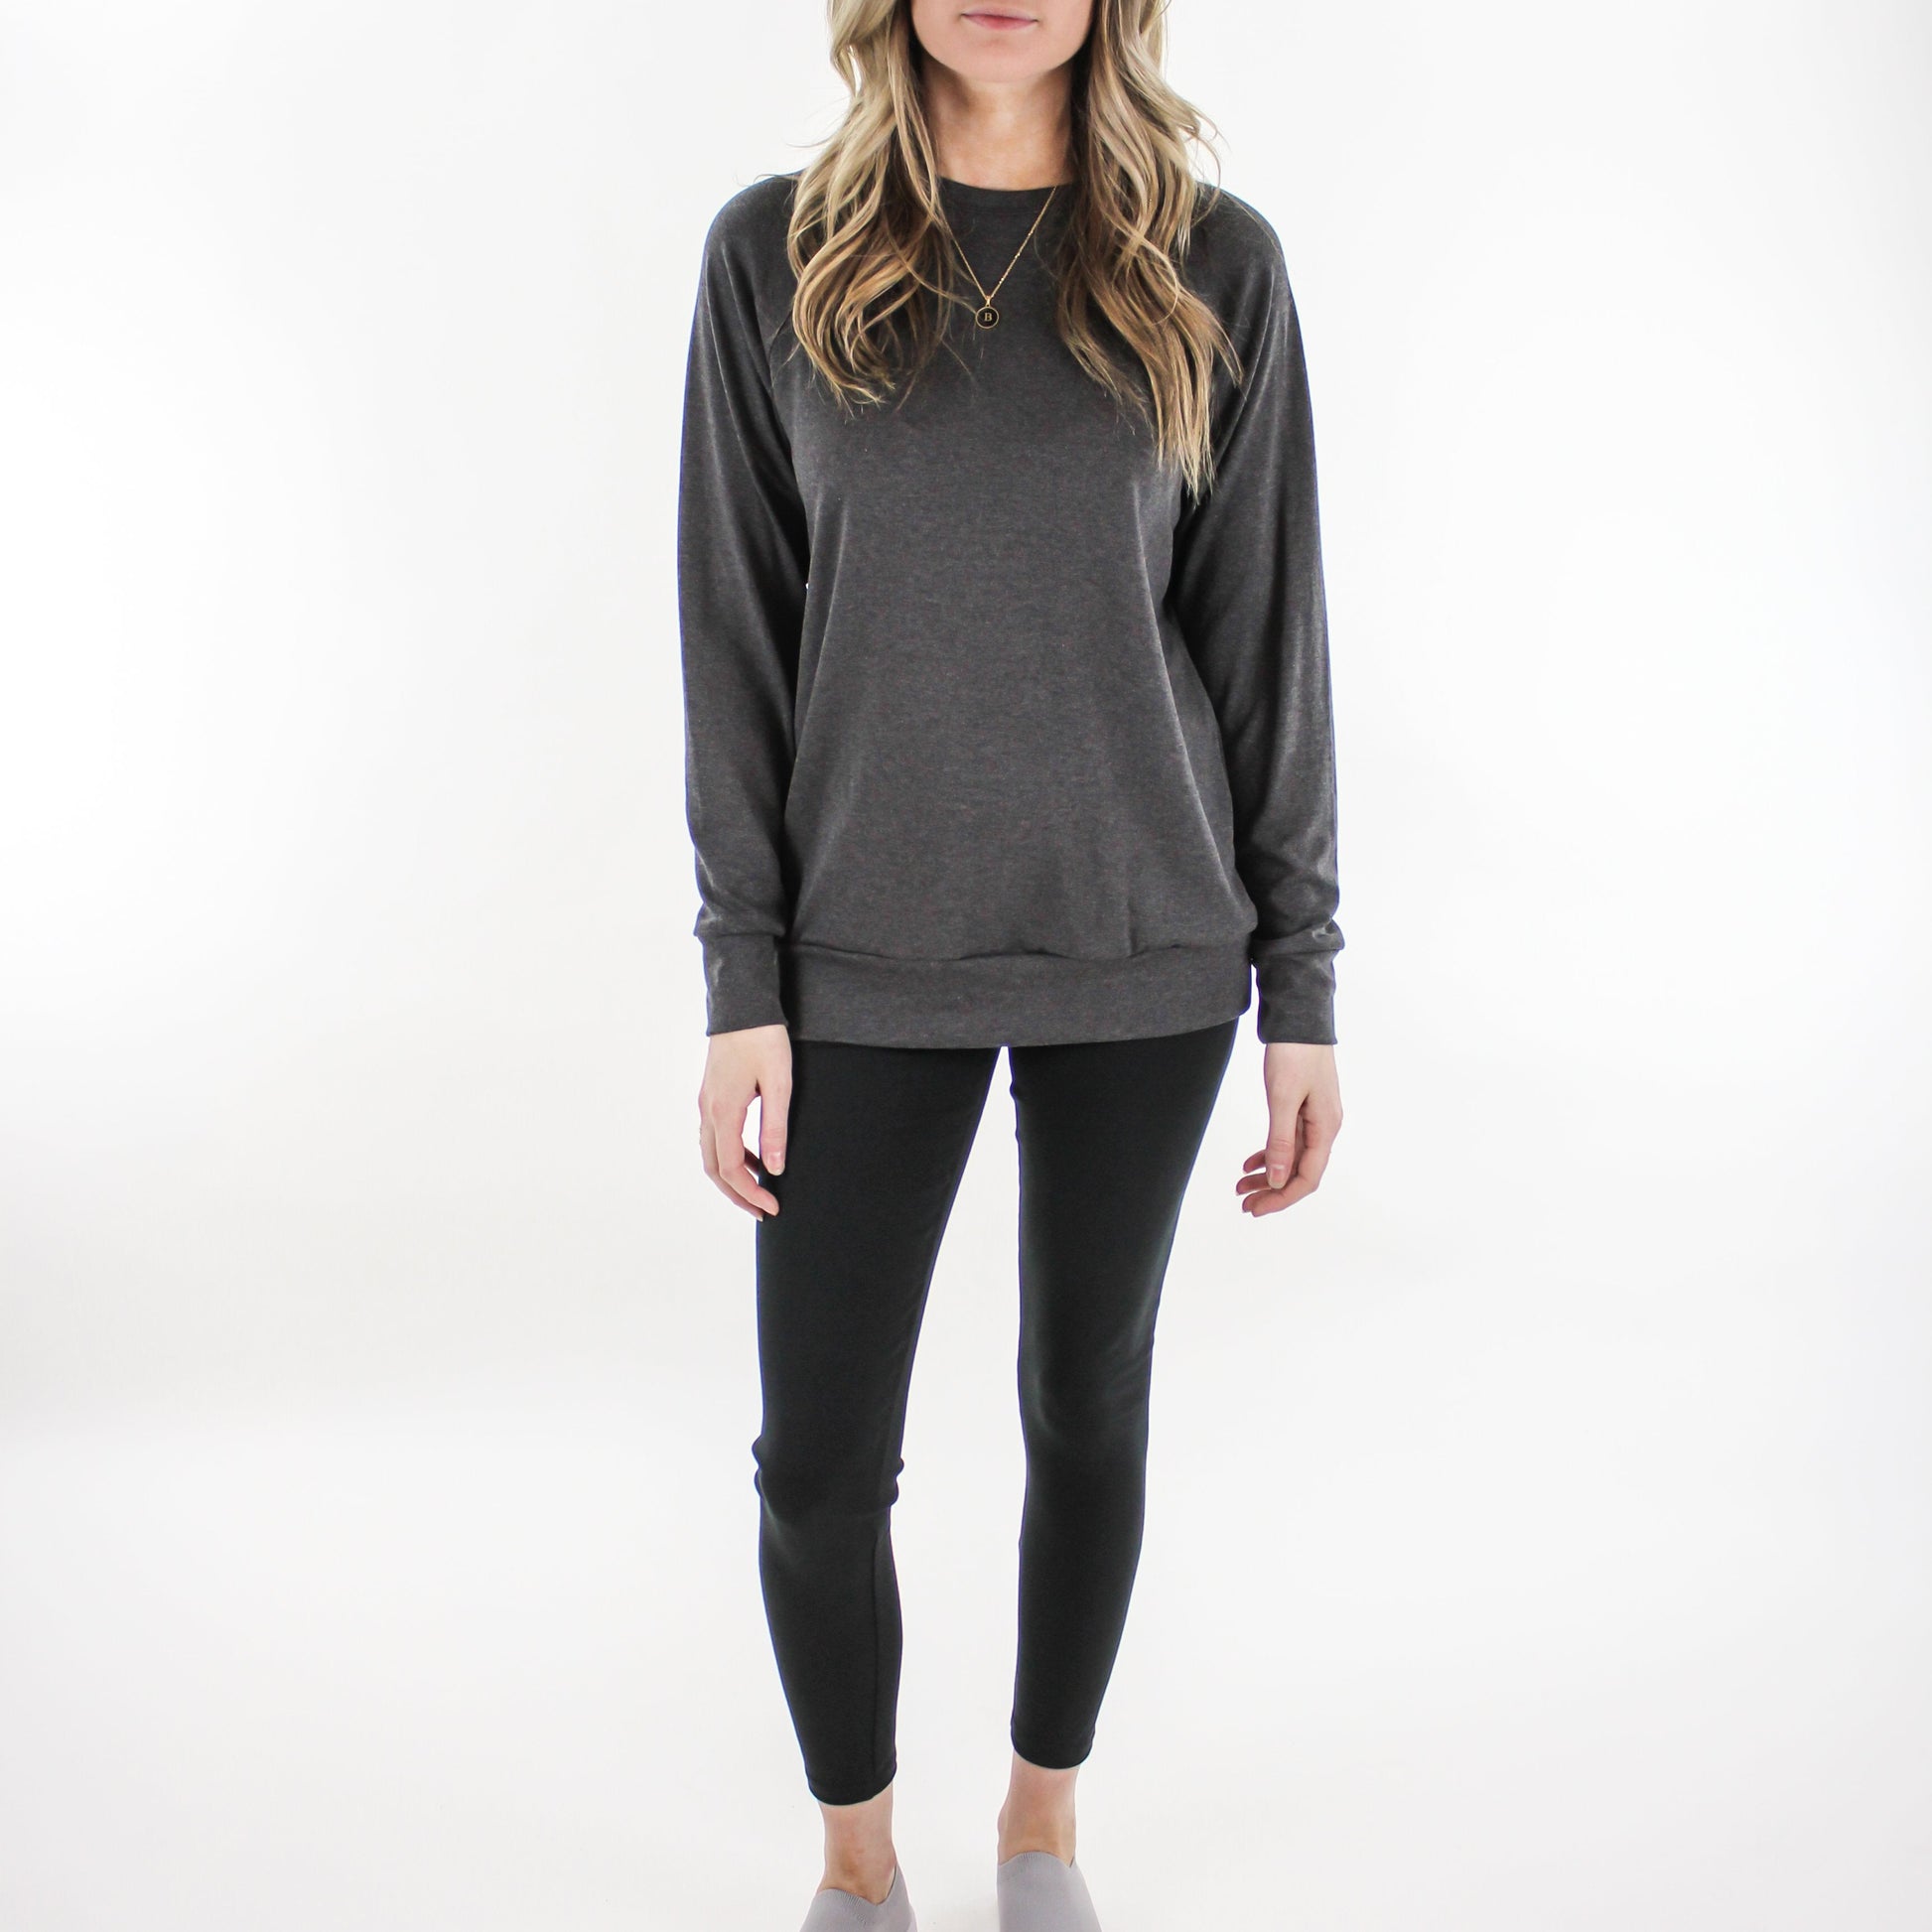 Little & Lively - Adult Unisex Bamboo/Cotton Pullover